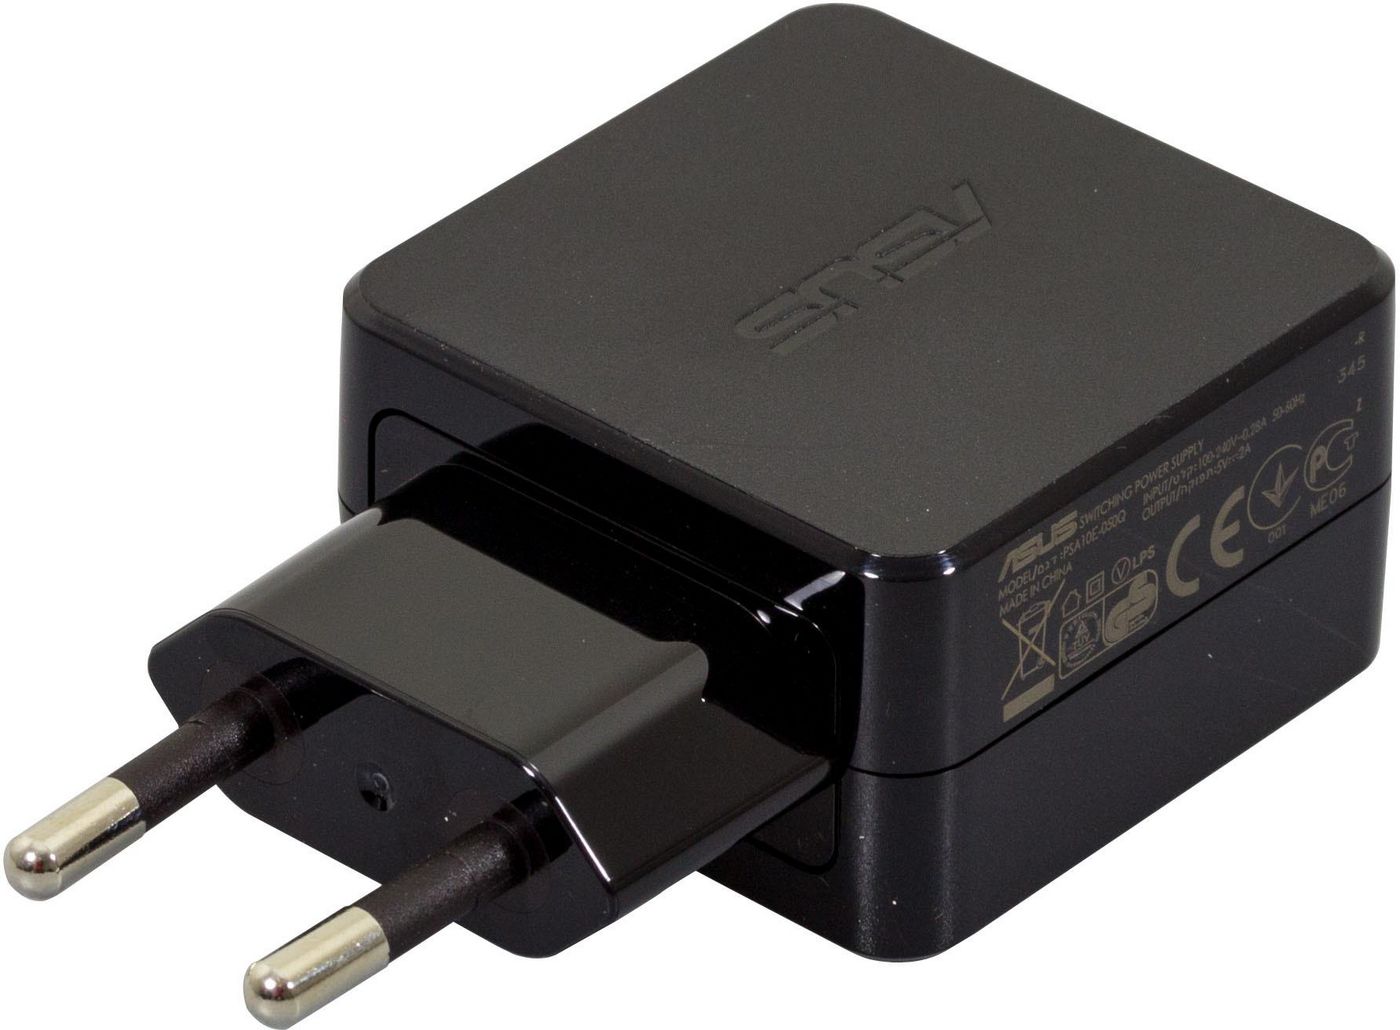 ASUS Power Adapter 10W 5V/2A